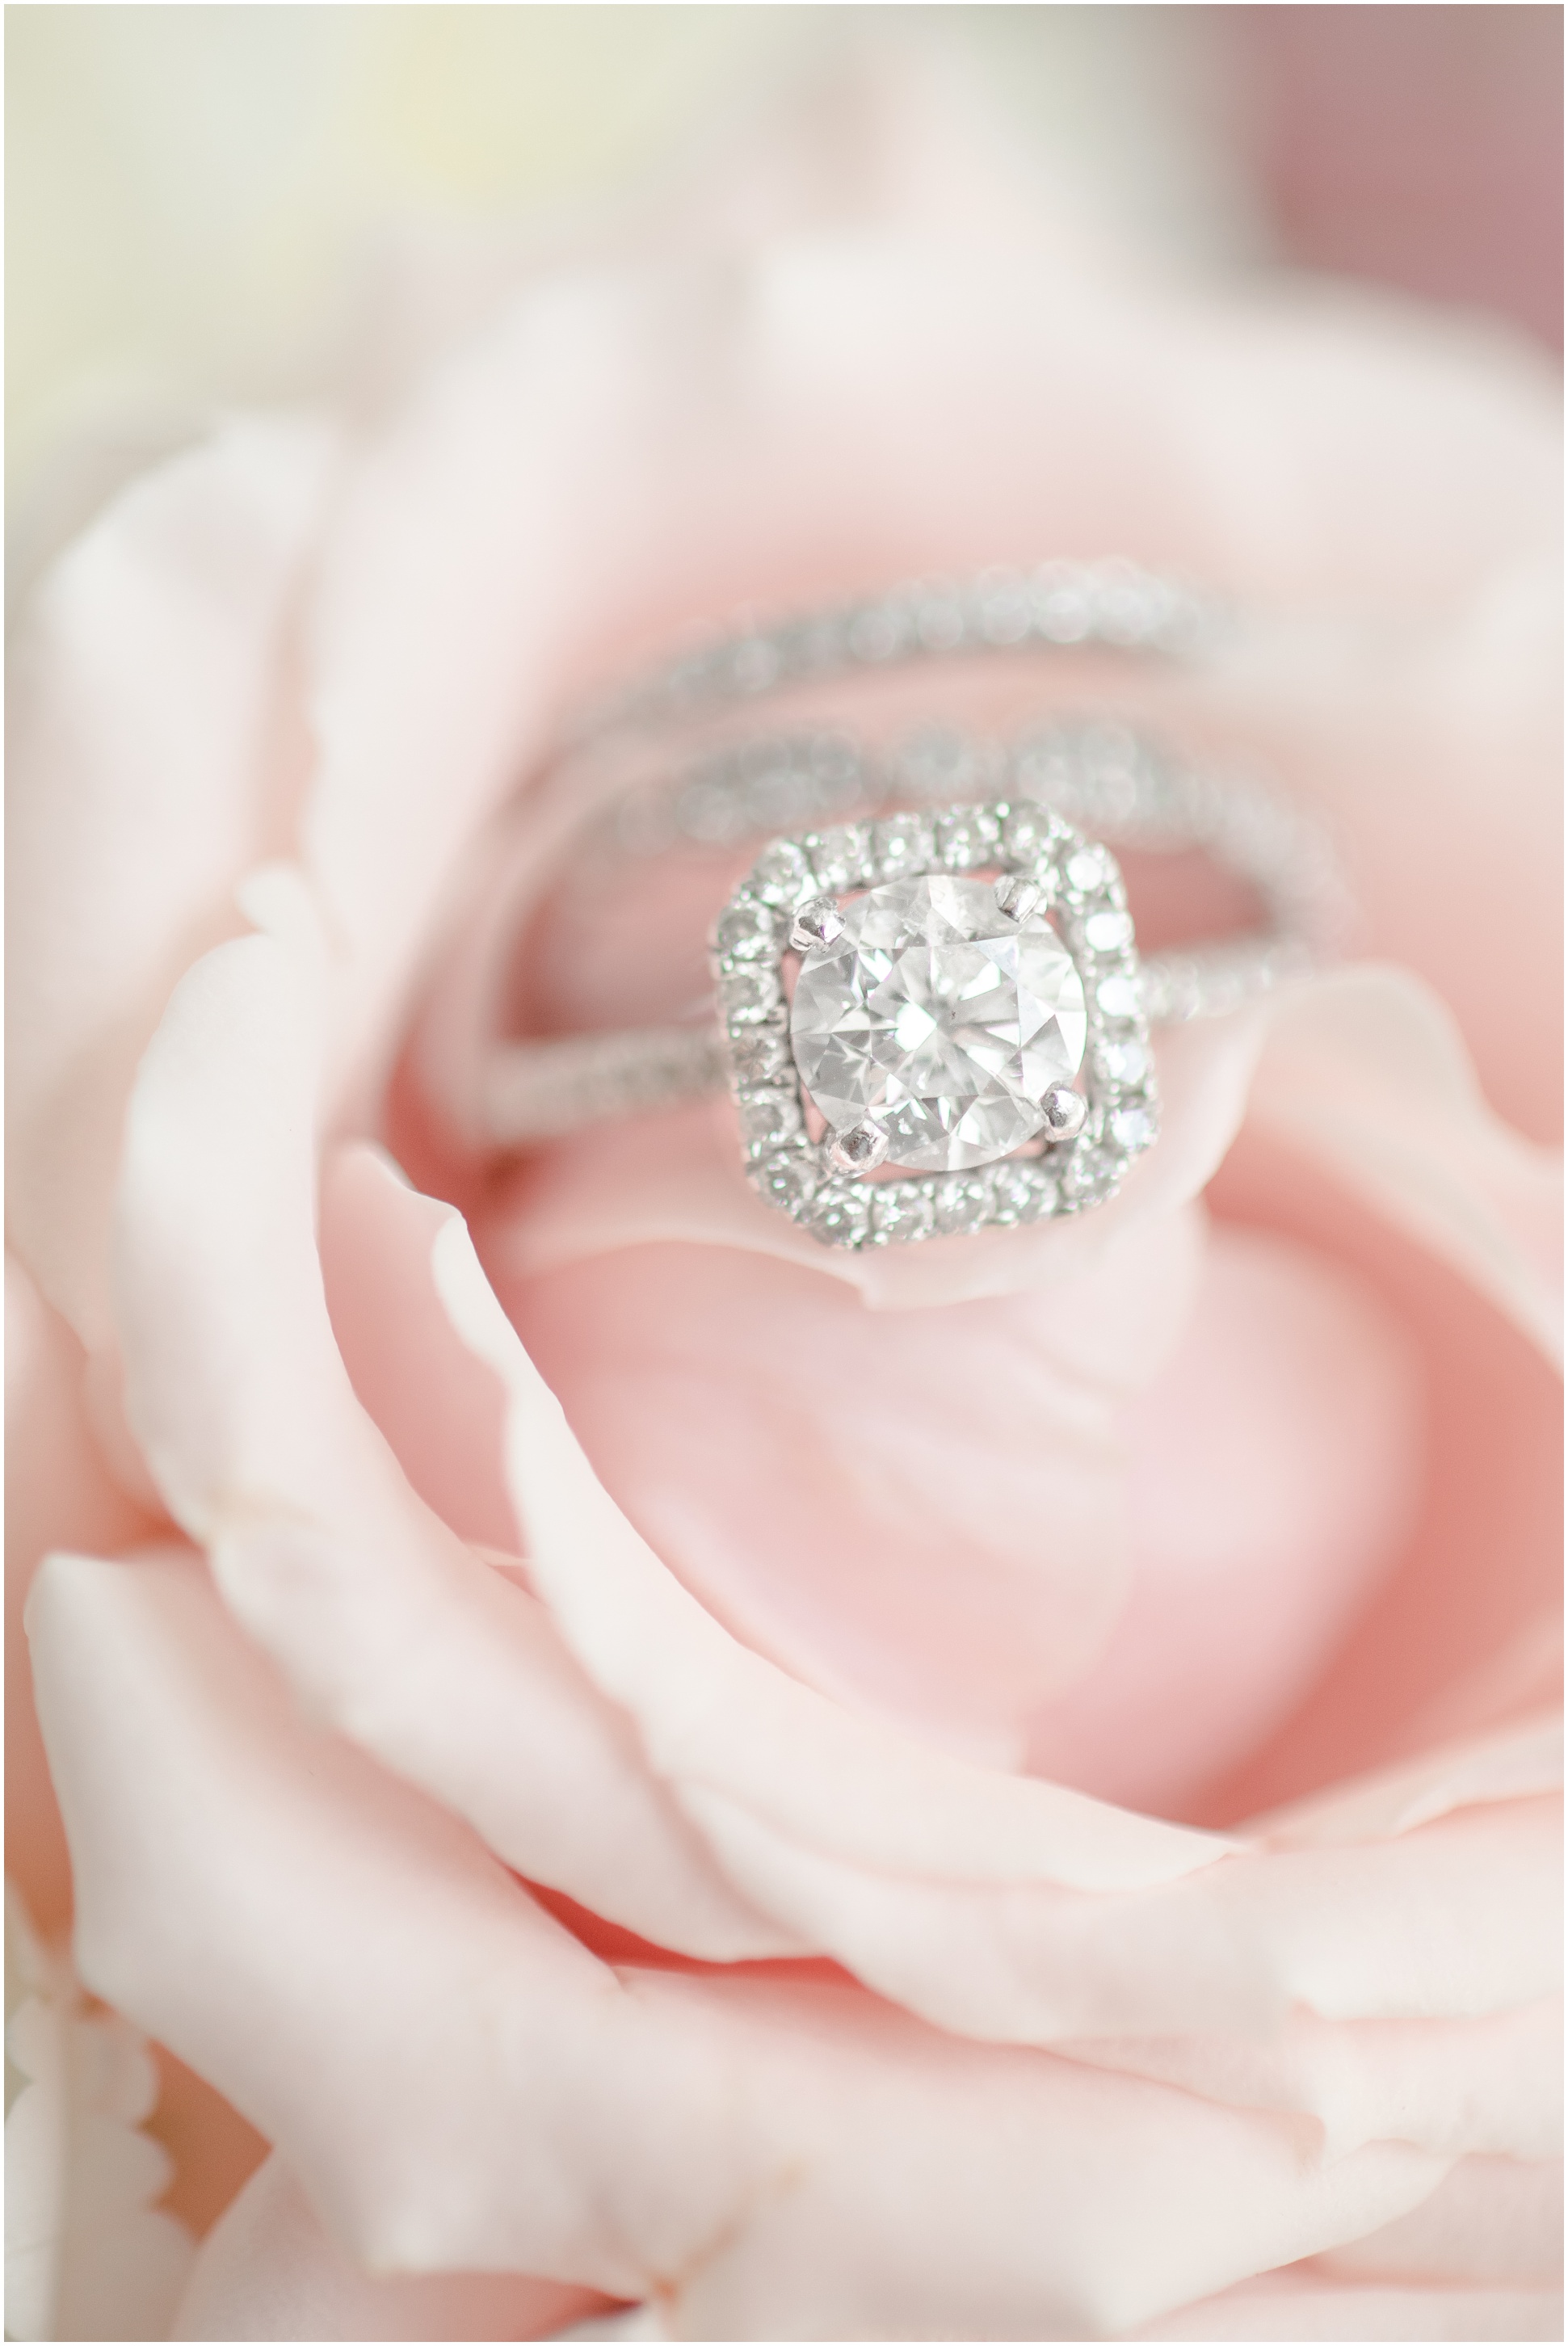 Square diamond engagement ring and wedding bands inside the petals of a blush rose